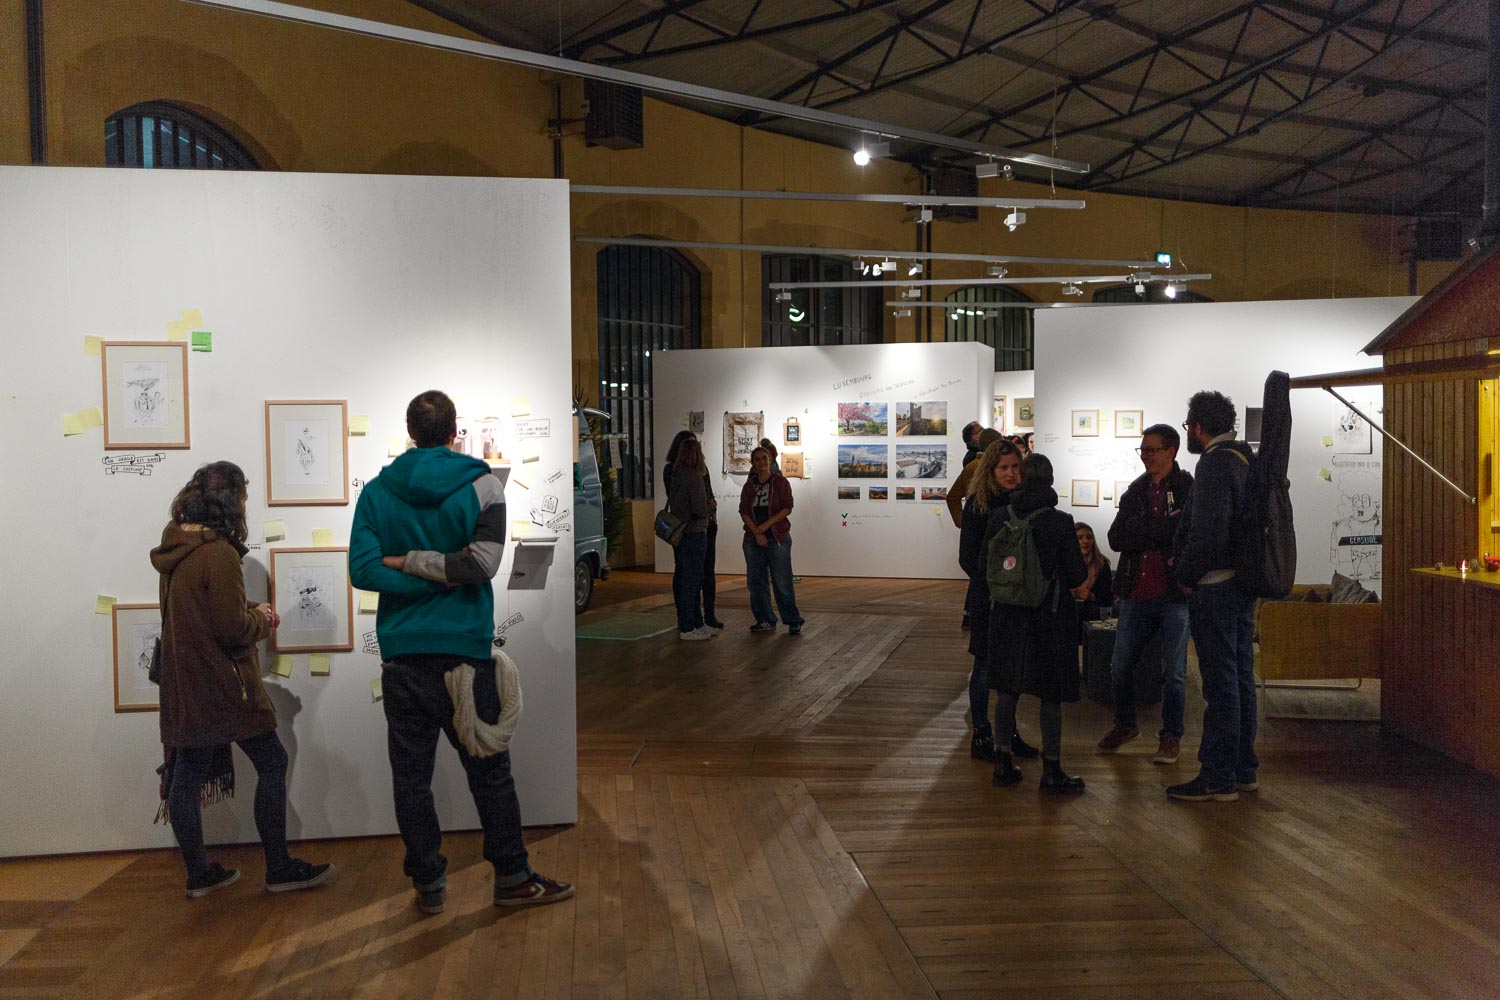 Troc'n'Brol 2016 at Rotondes - Art exchange in Luxembourg City - Photography by Christophe Van Biesen - Landscape and Travel Photographer from Luxembourg